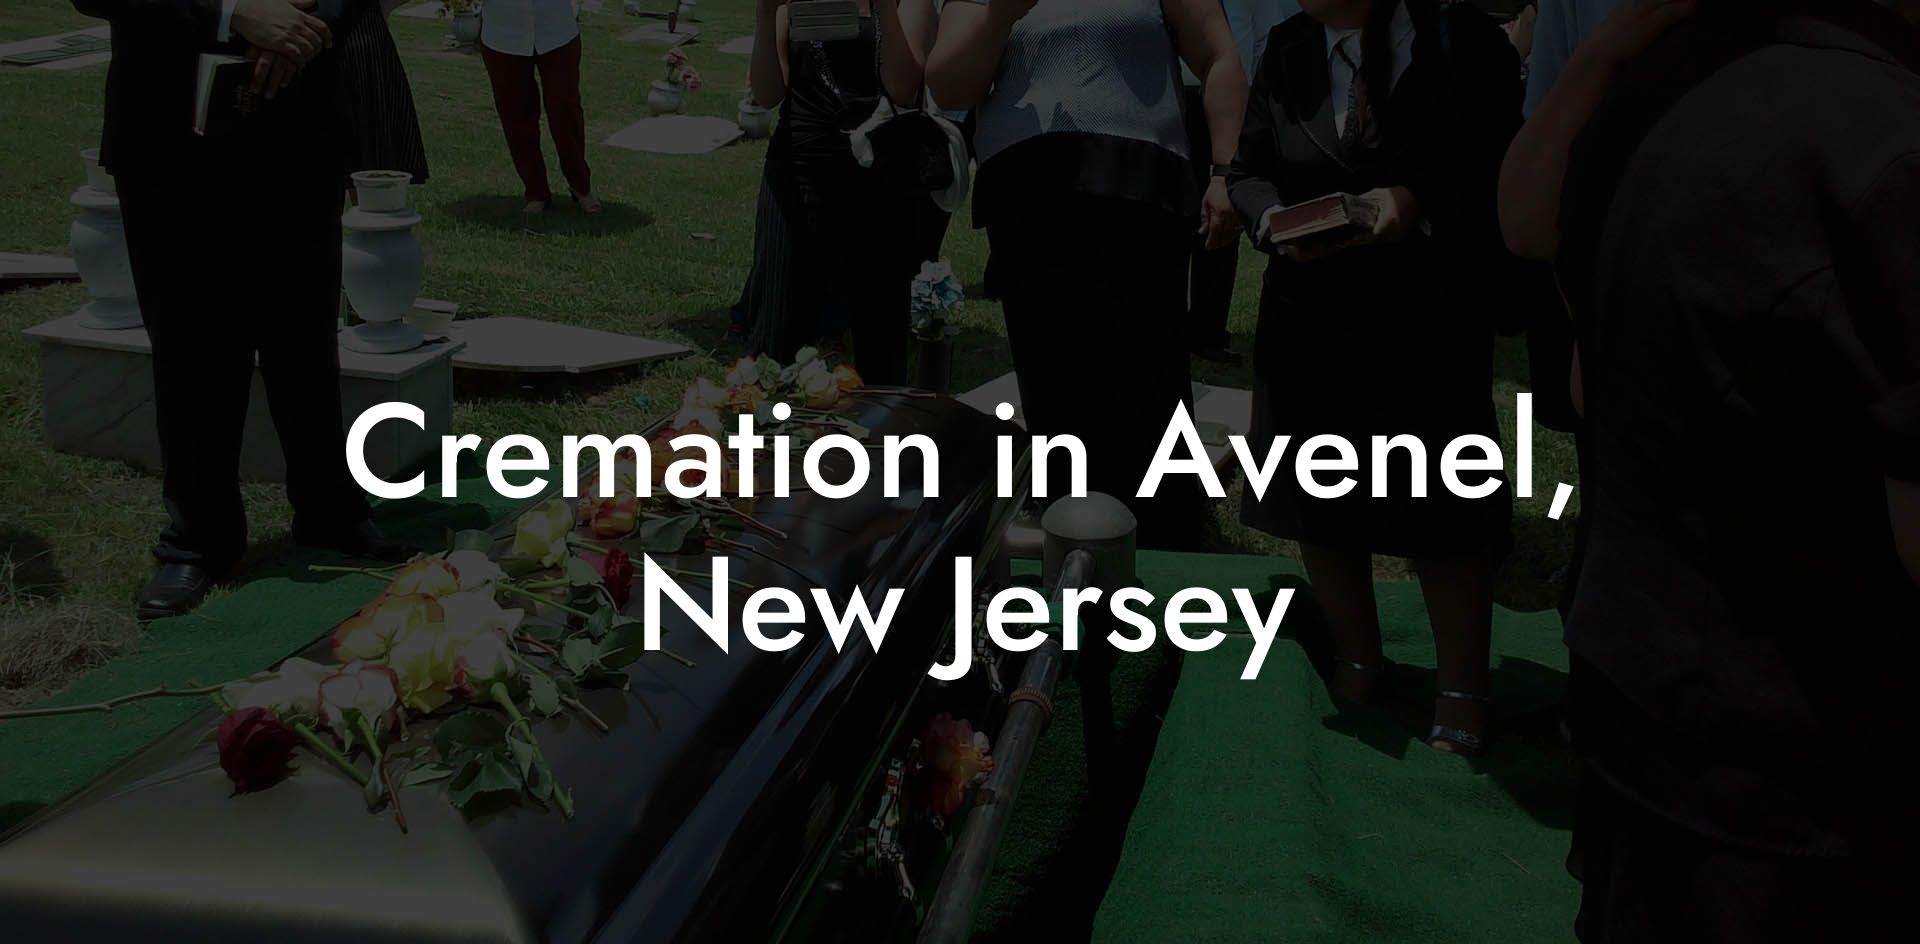 Cremation in Avenel, New Jersey